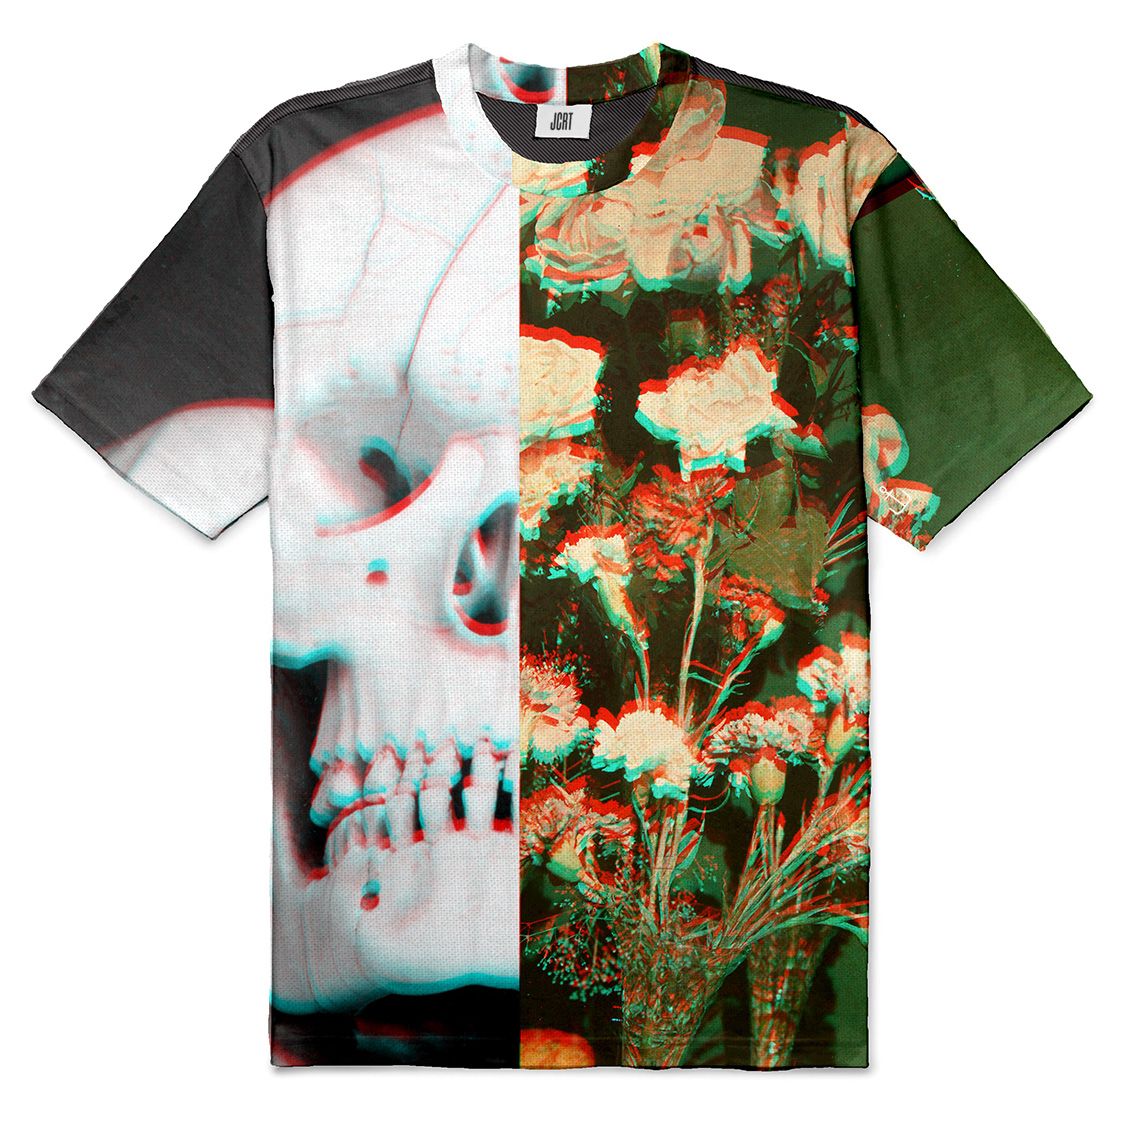 The Still Life with Flowers and Skull Collage T-Shirt